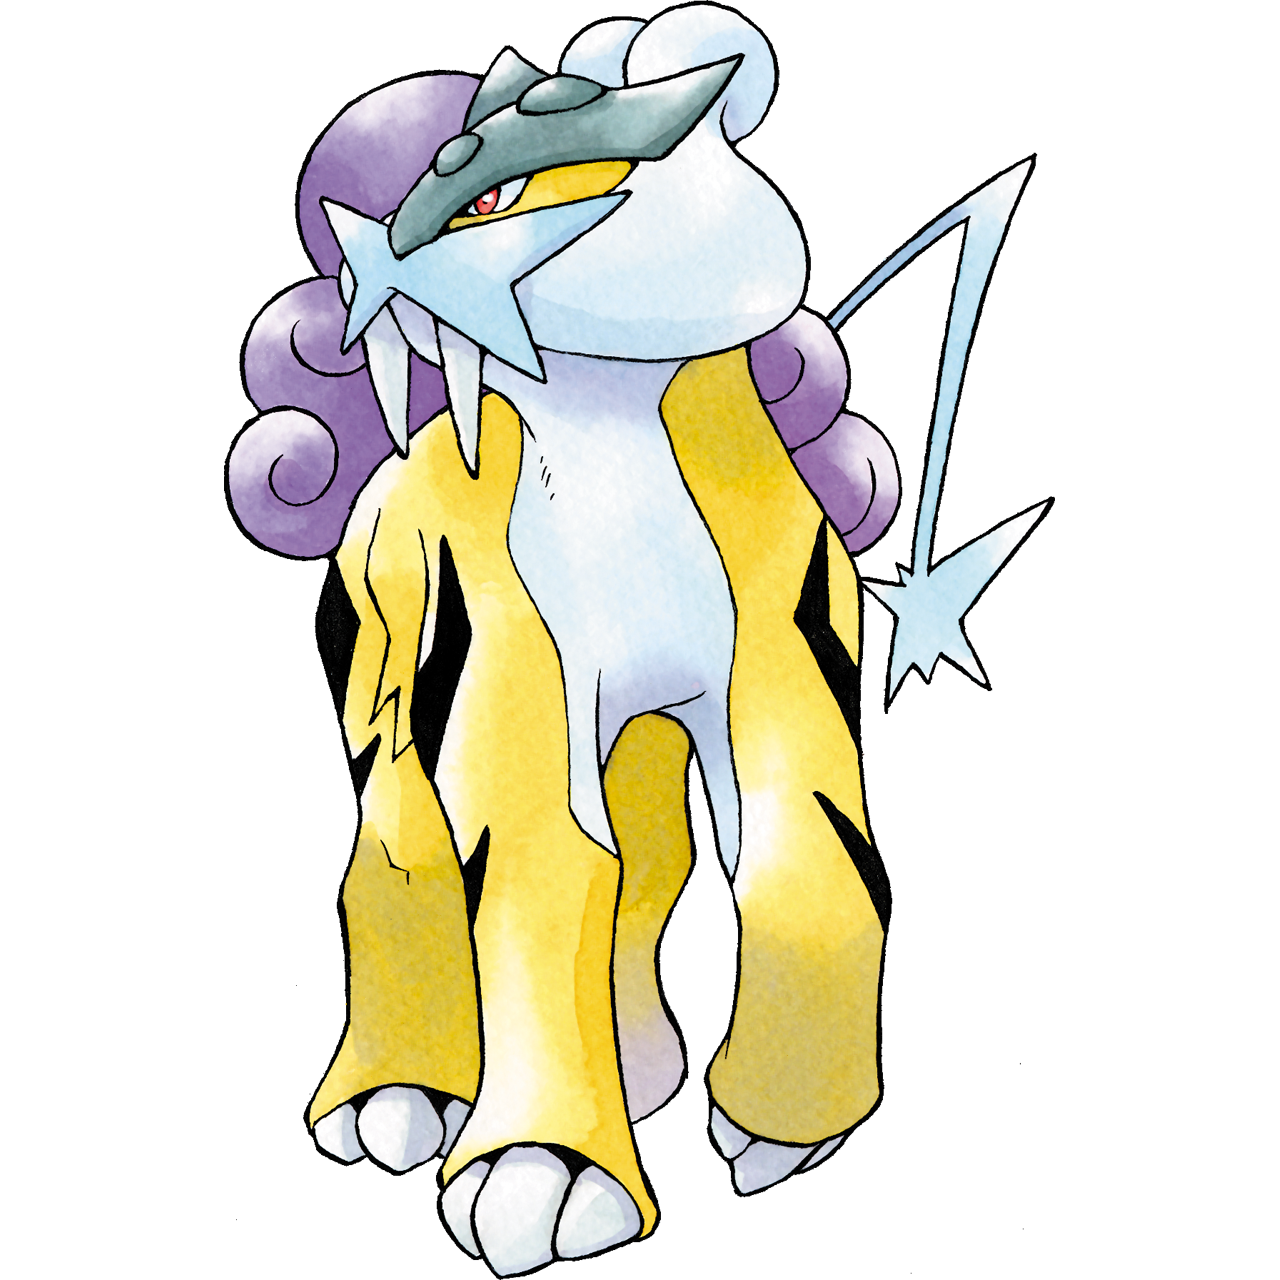 Raikou. Resembling a tiger, they have yellow fur, with black markings and a white belly. They have a long purple mane down their back and a blue tail, shaped like a lightning bolt. The crest on their face is black on the forehead, pointed like cat ears, and blue spikes resembling whiskers. They have long fangs like a sabretooth.